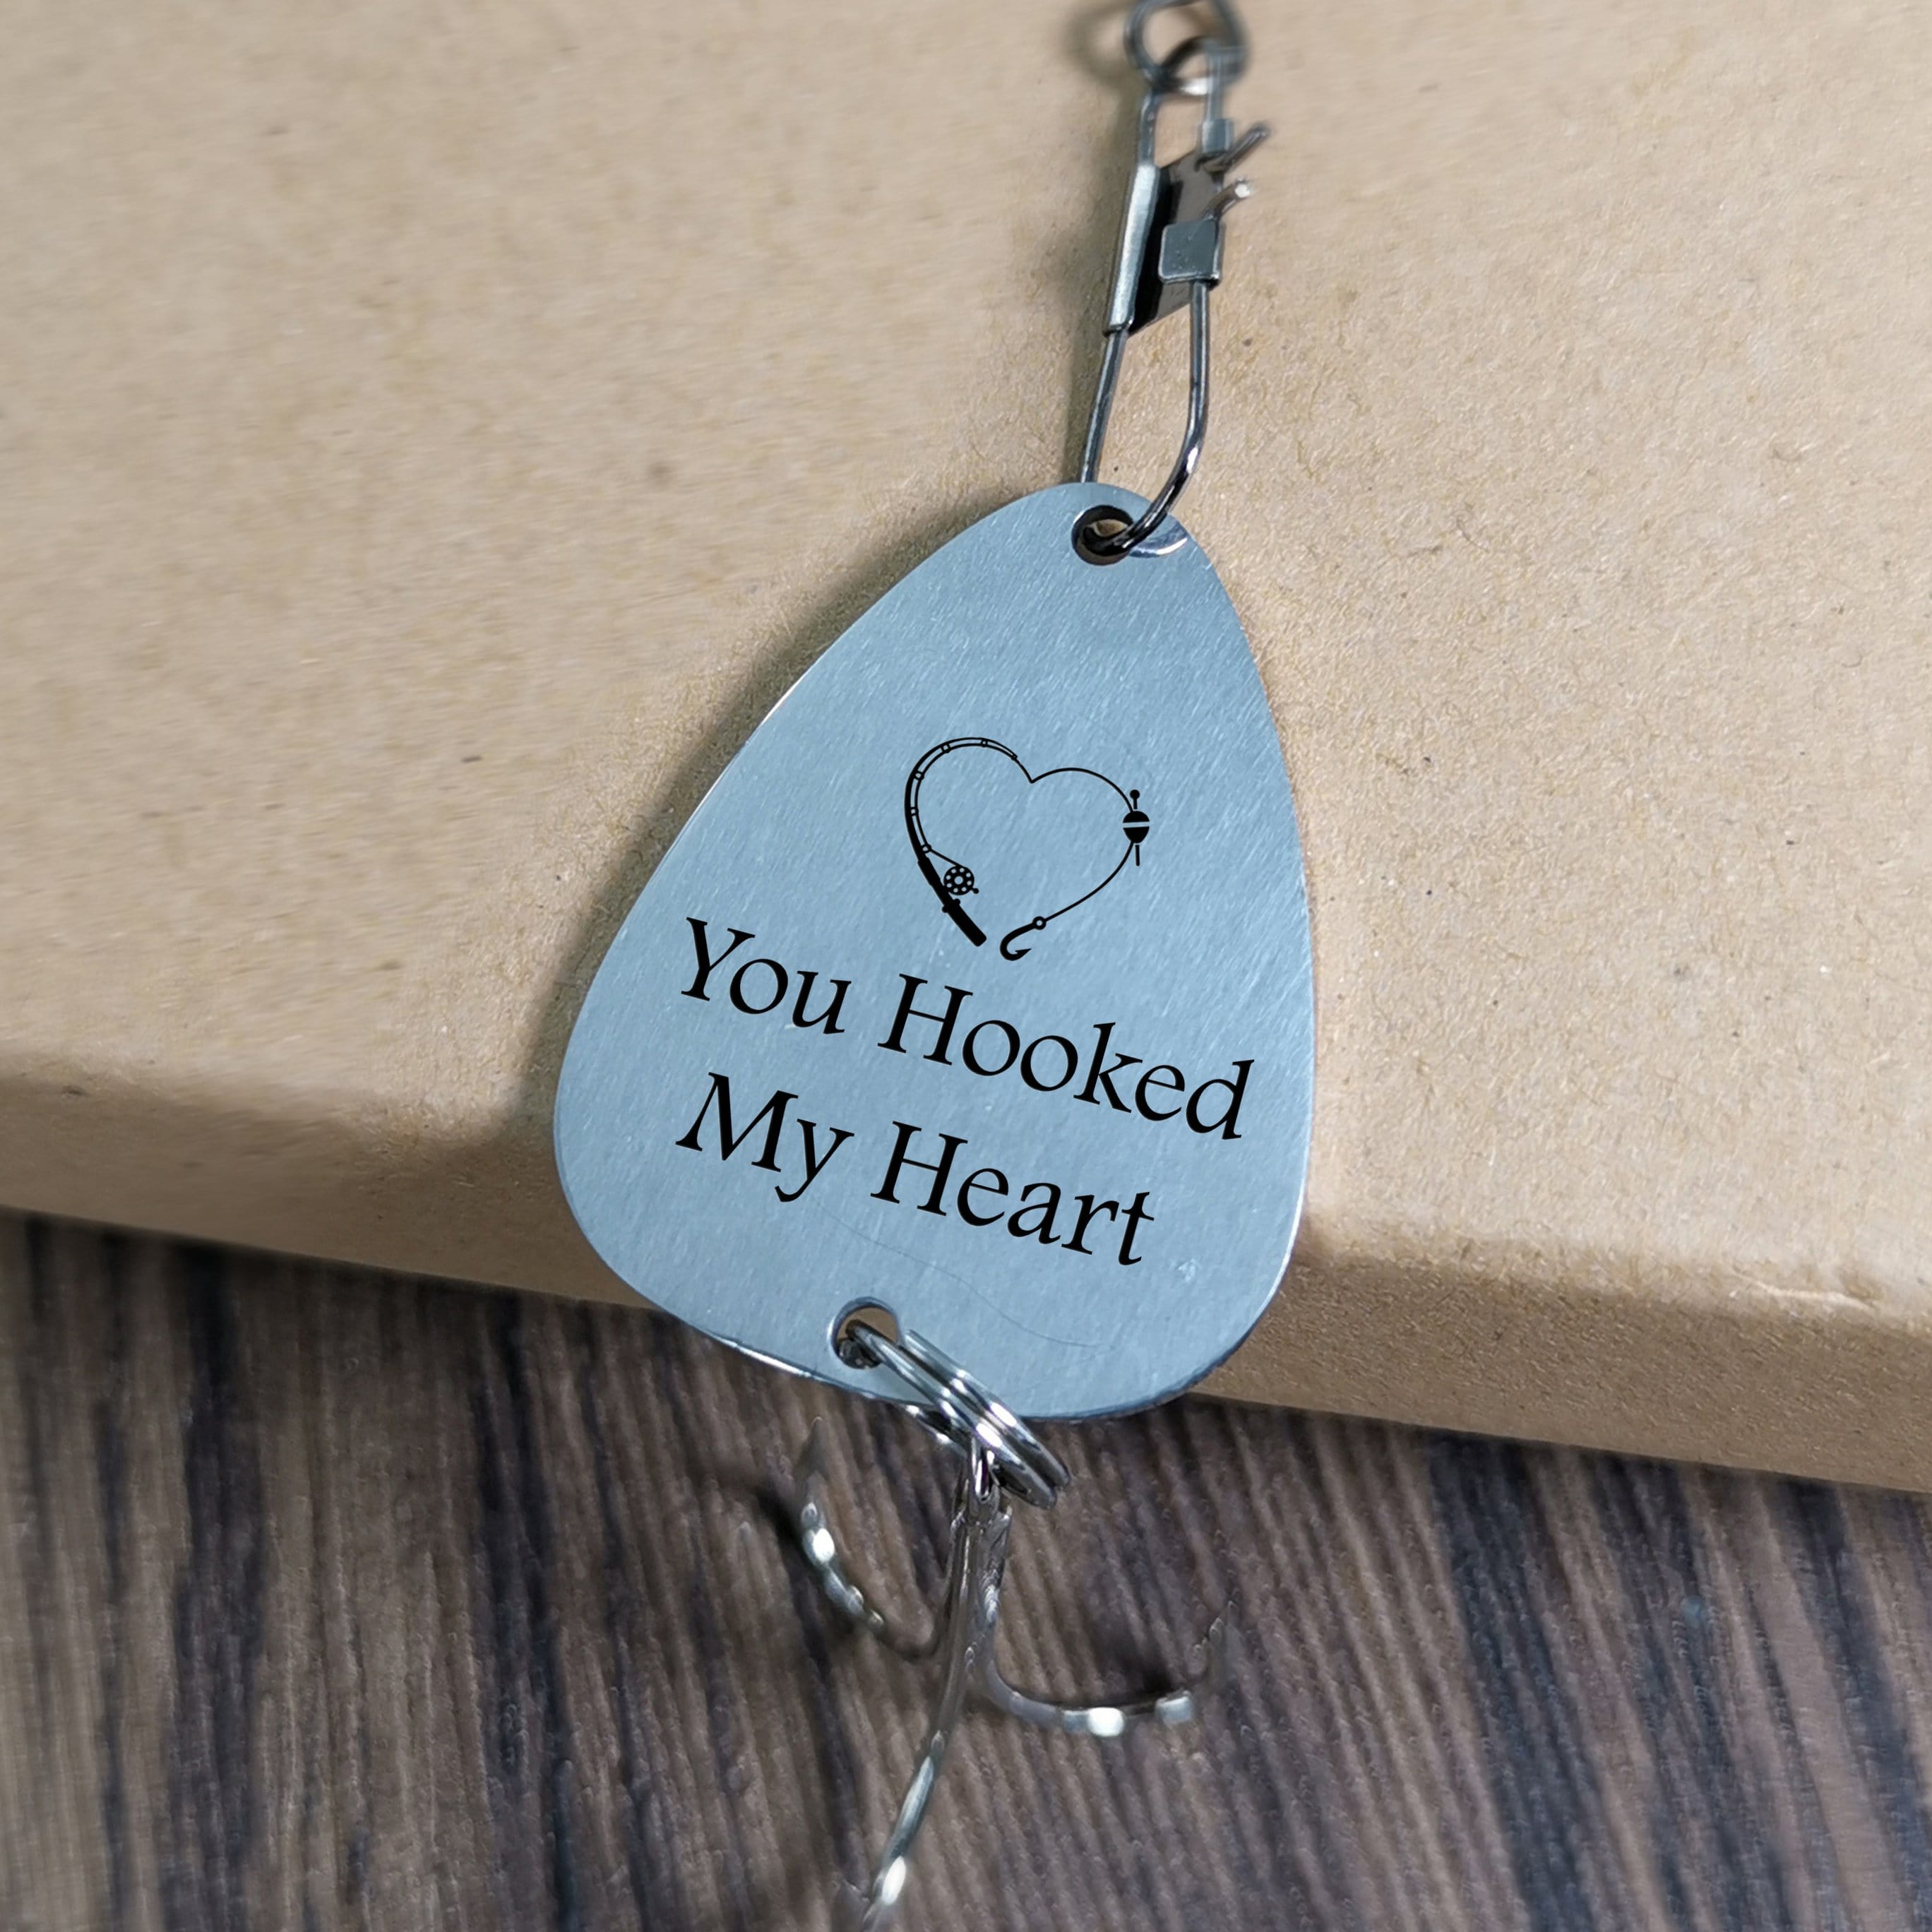 Fishing Hook To My Husband - You Hooked My Heart Engraved Fishing Lure GiveMe-Gifts